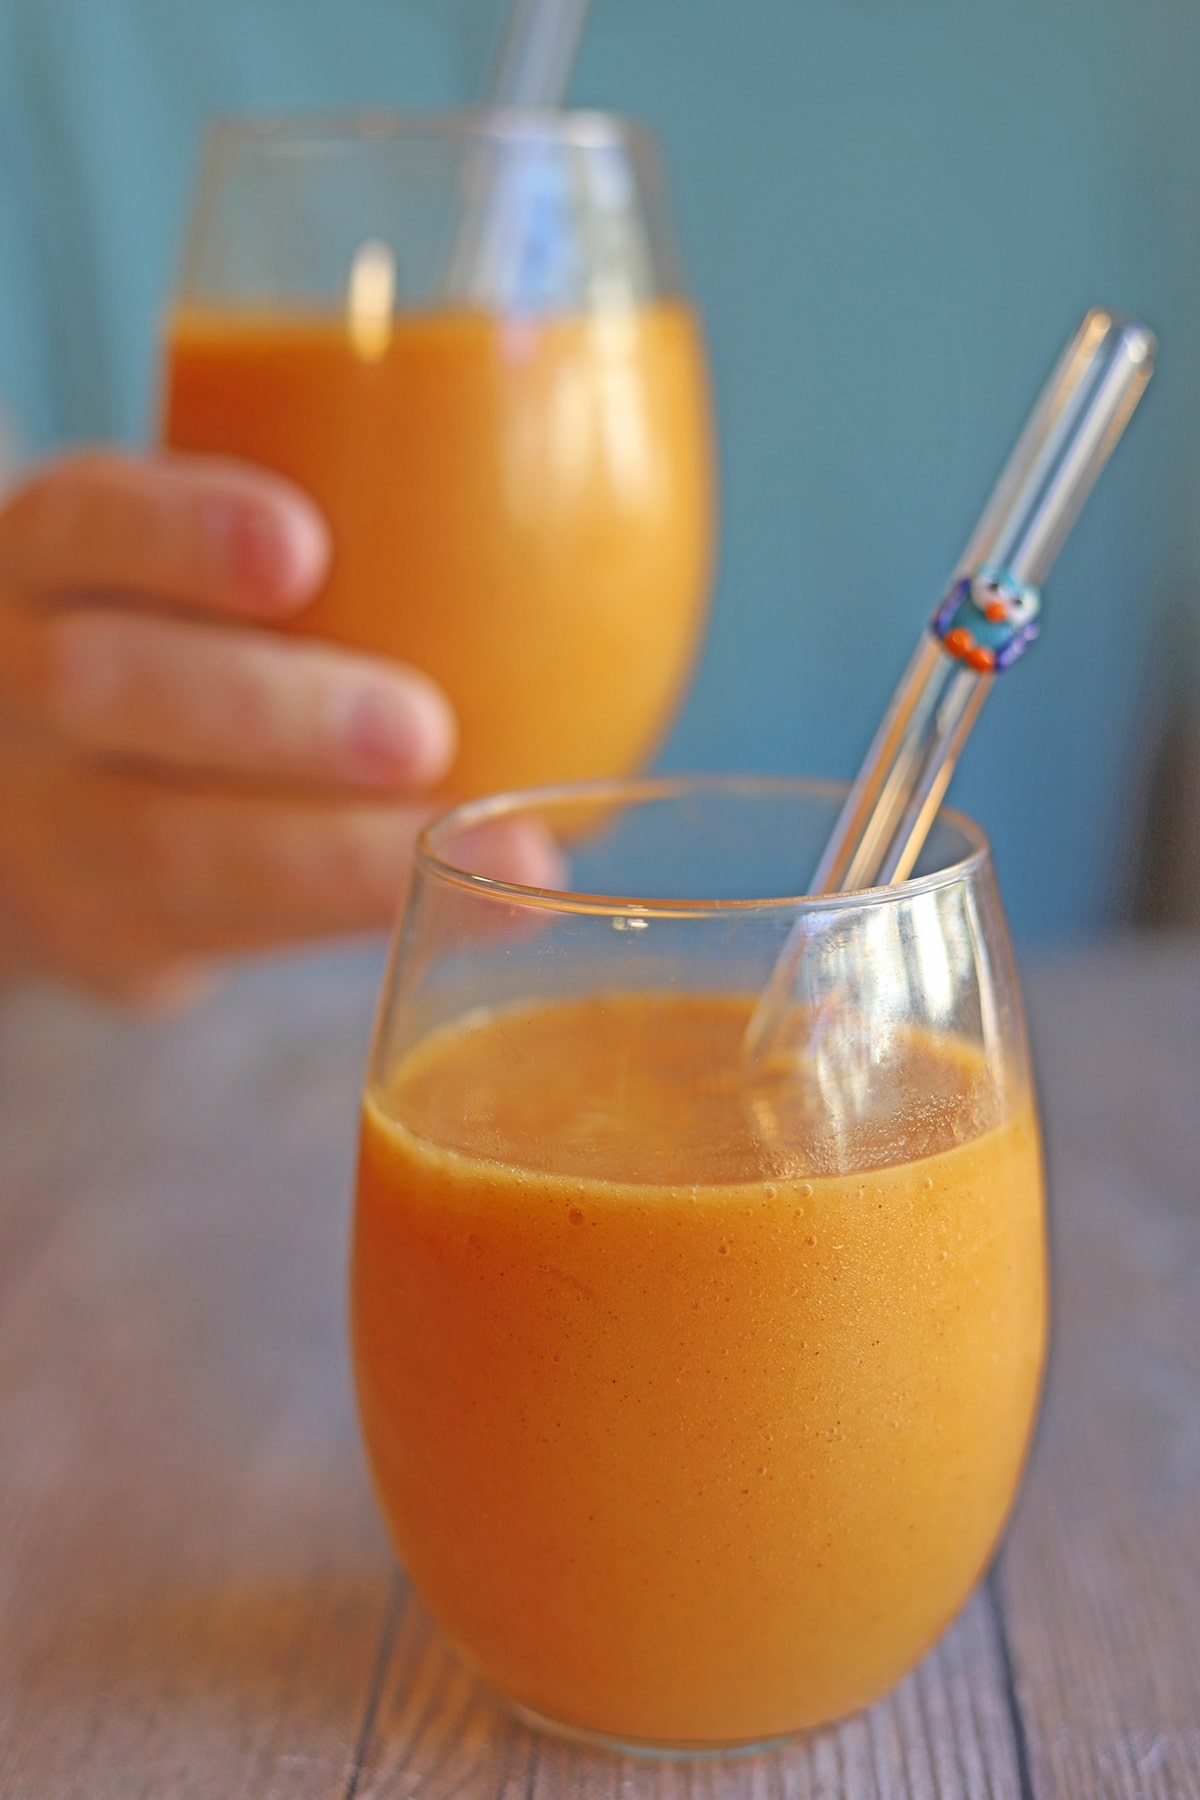 Sweet potato smoothie in glass with straw, hand holding glass in background.